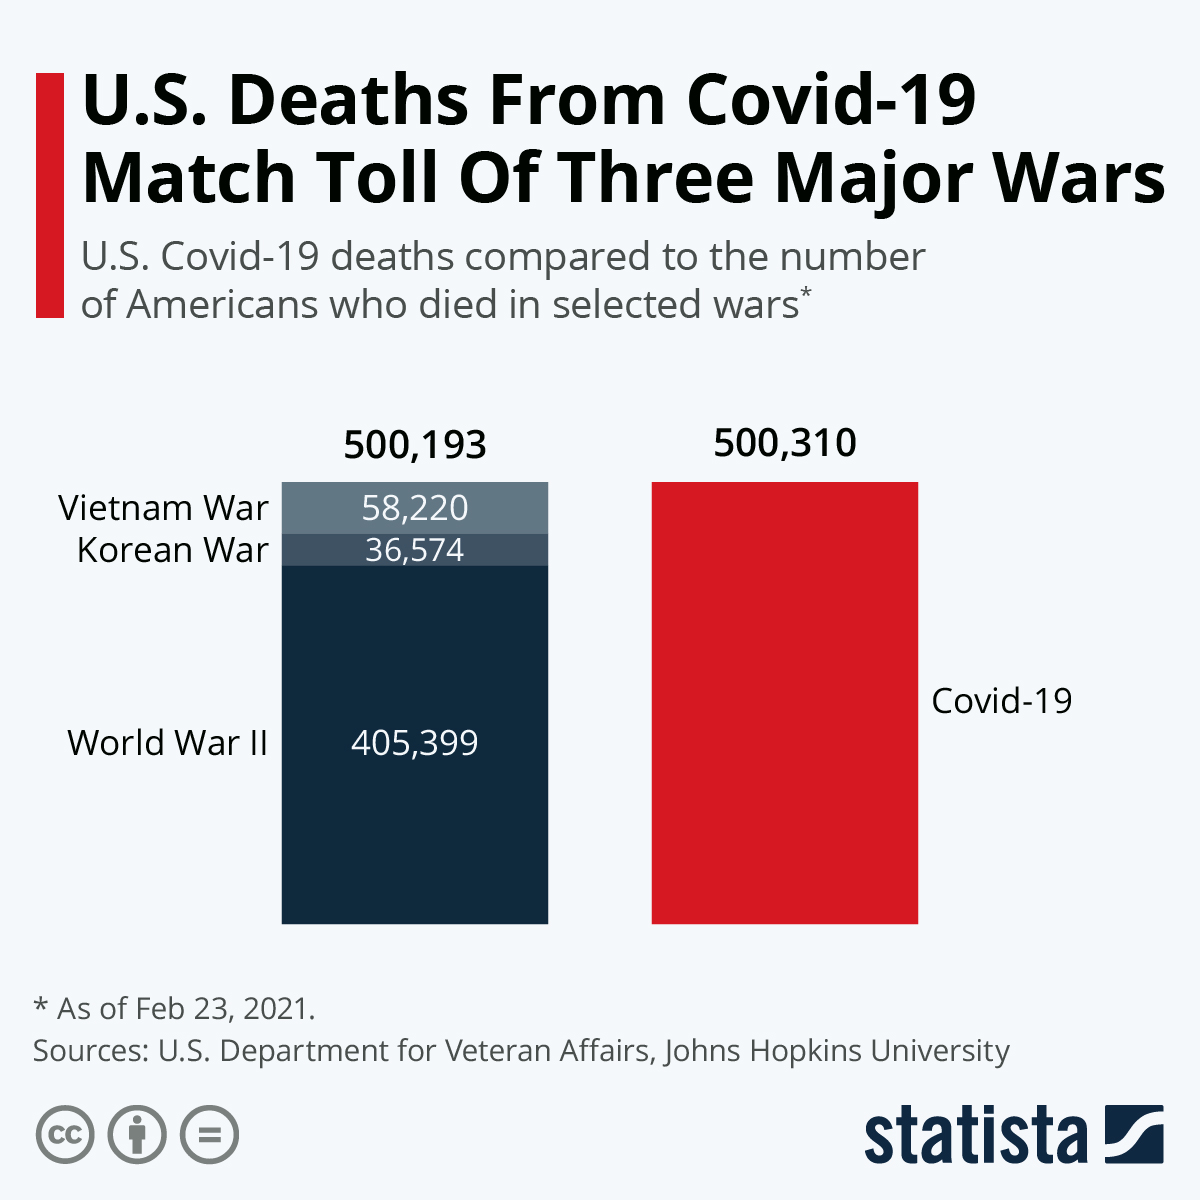 U.S. Deaths From Covid-19 Match Toll Of Three Major Wars